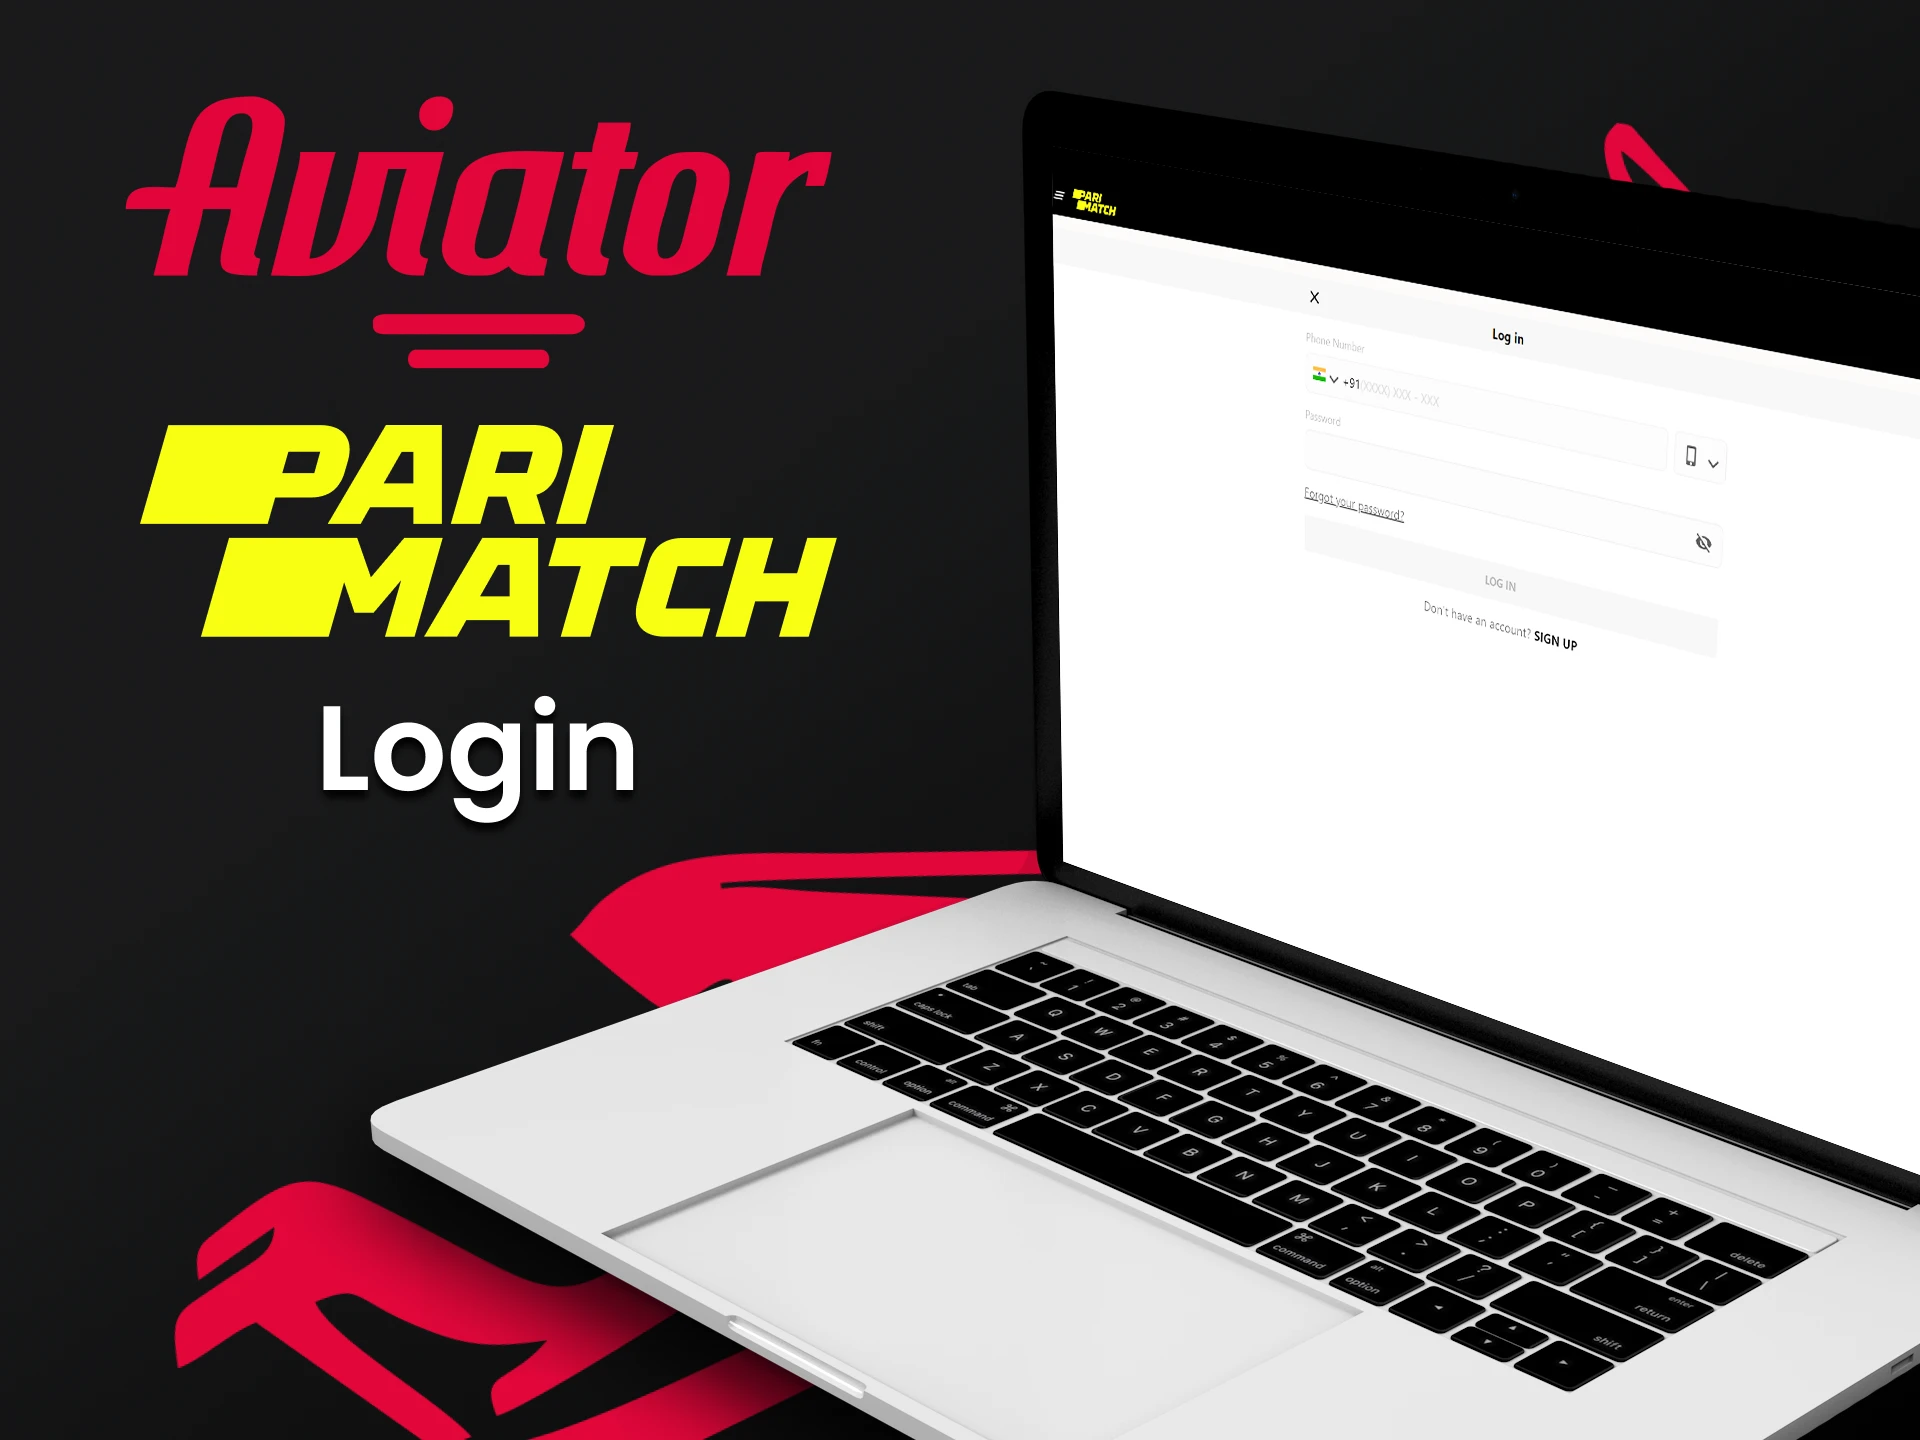 Login to your account to play Aviator at Parimatch.